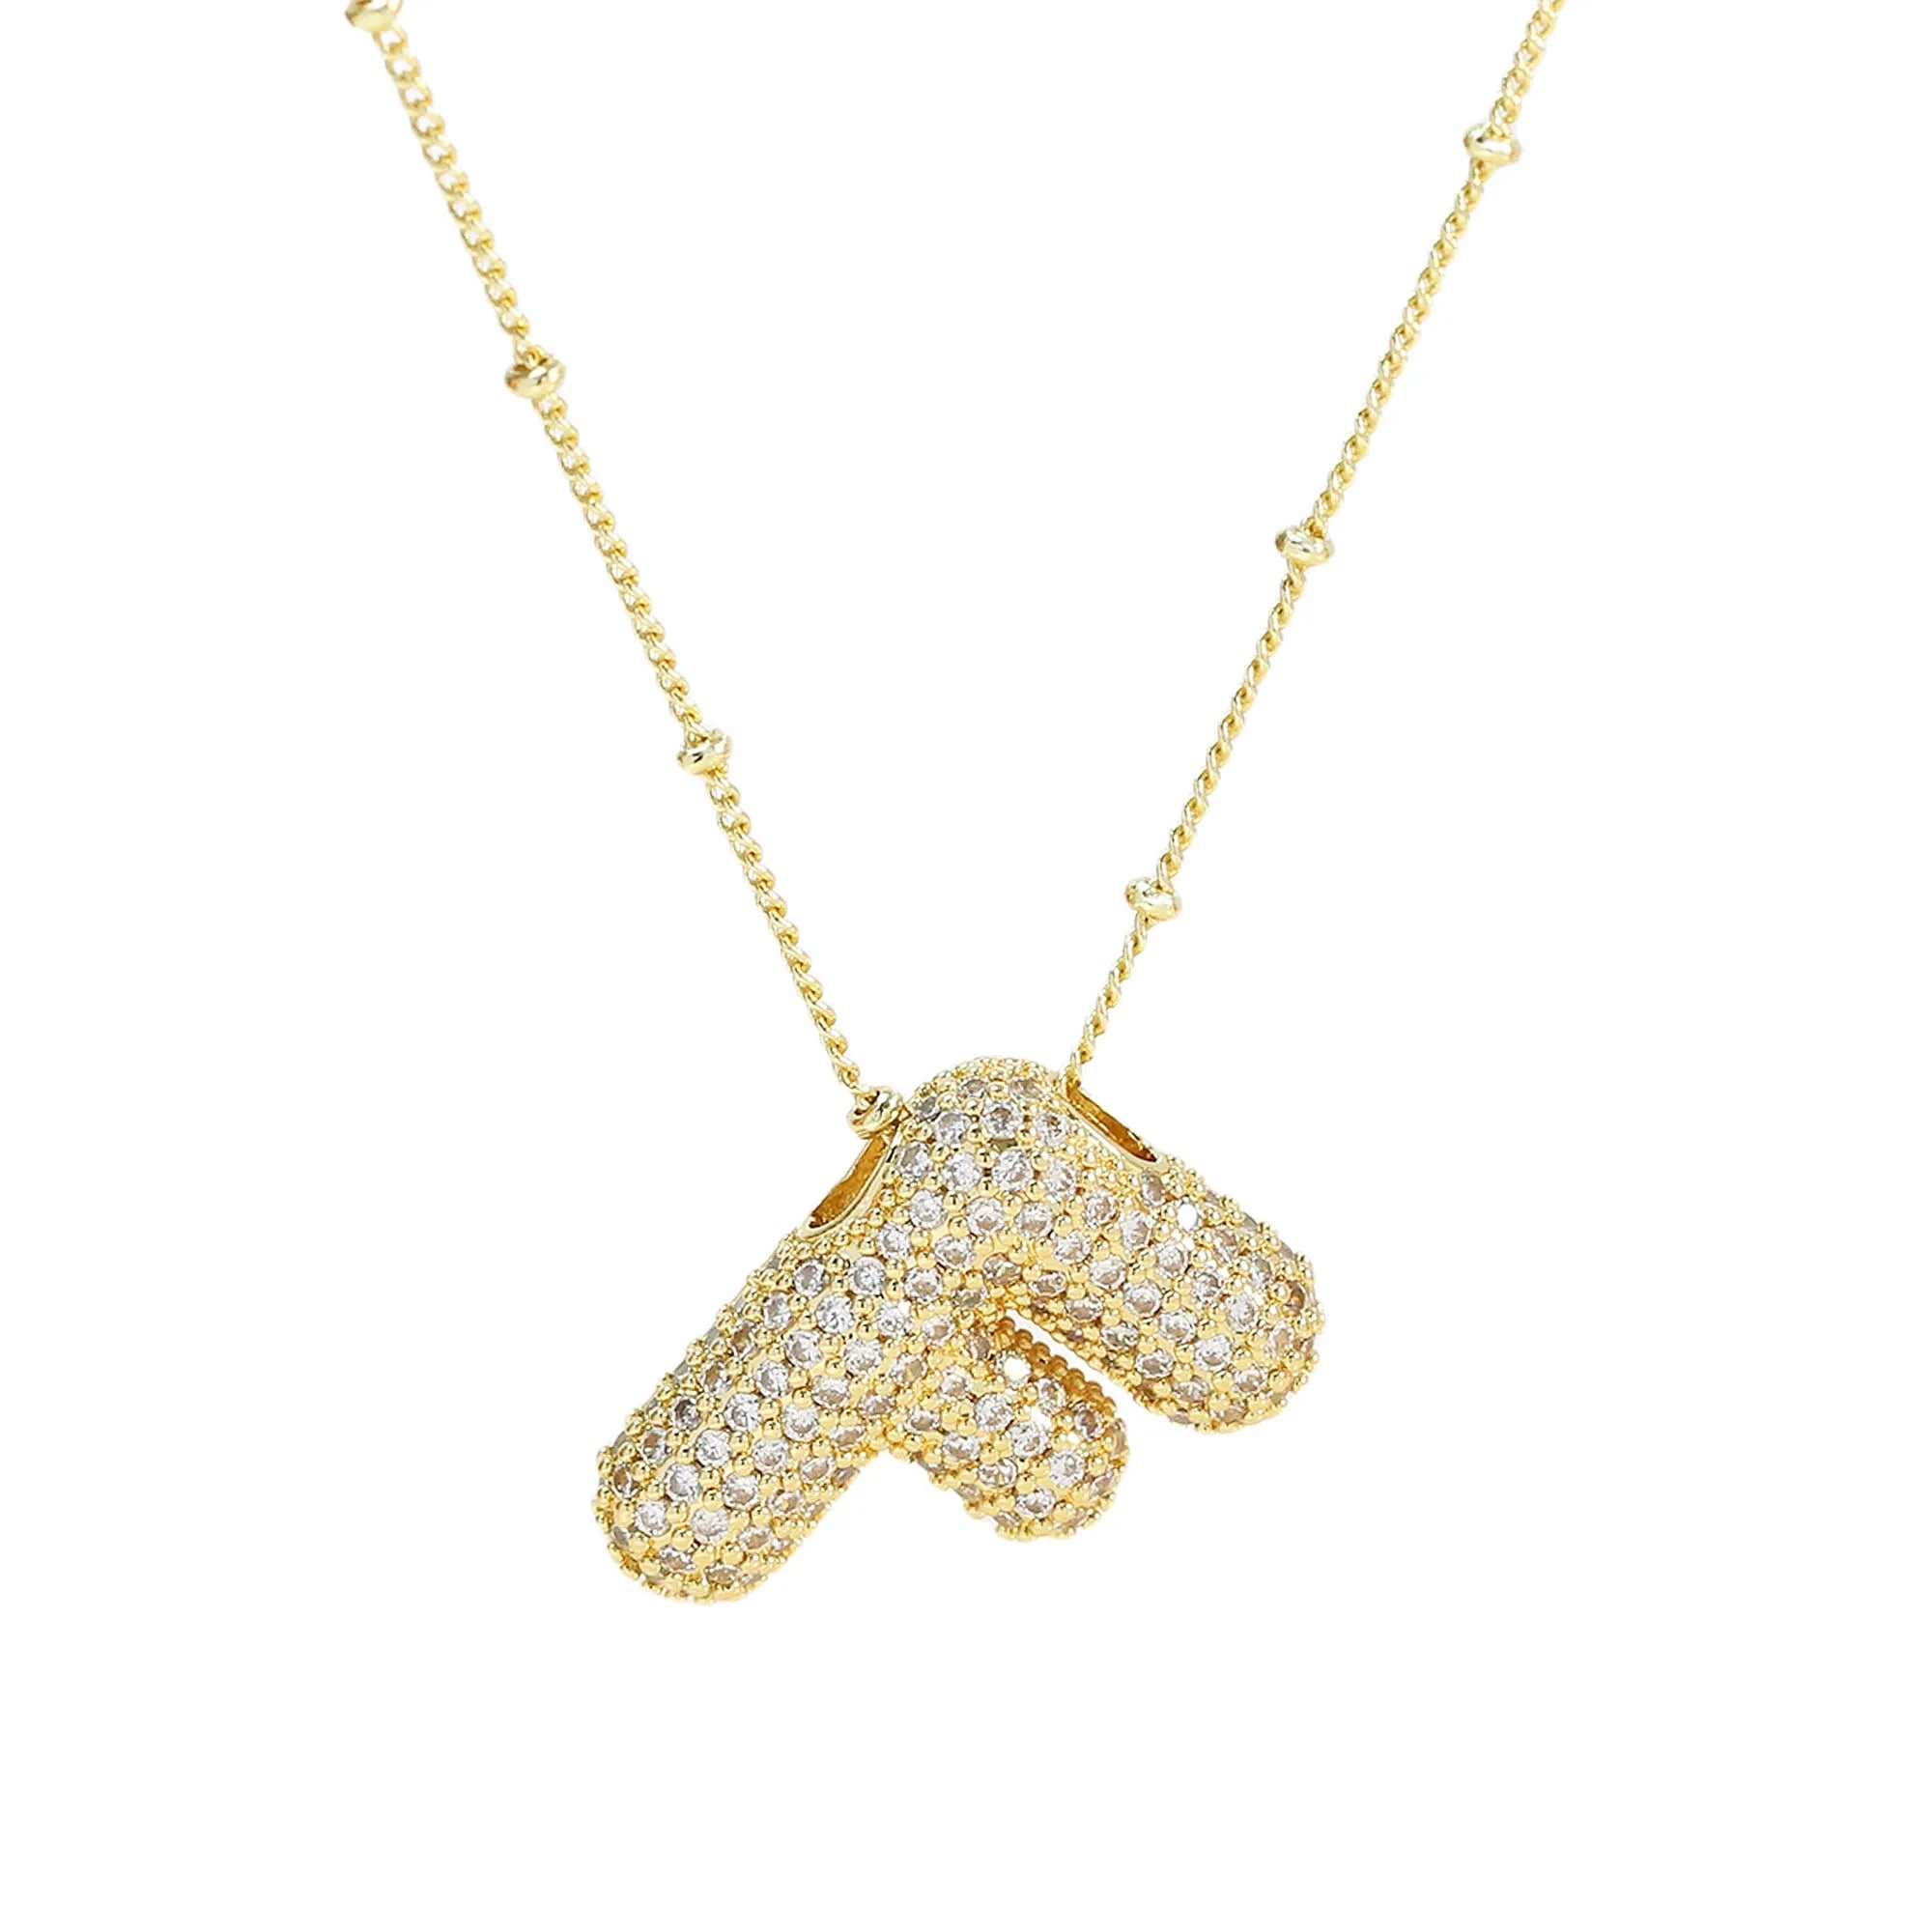 MARCELLA INITIAL NECKLACE